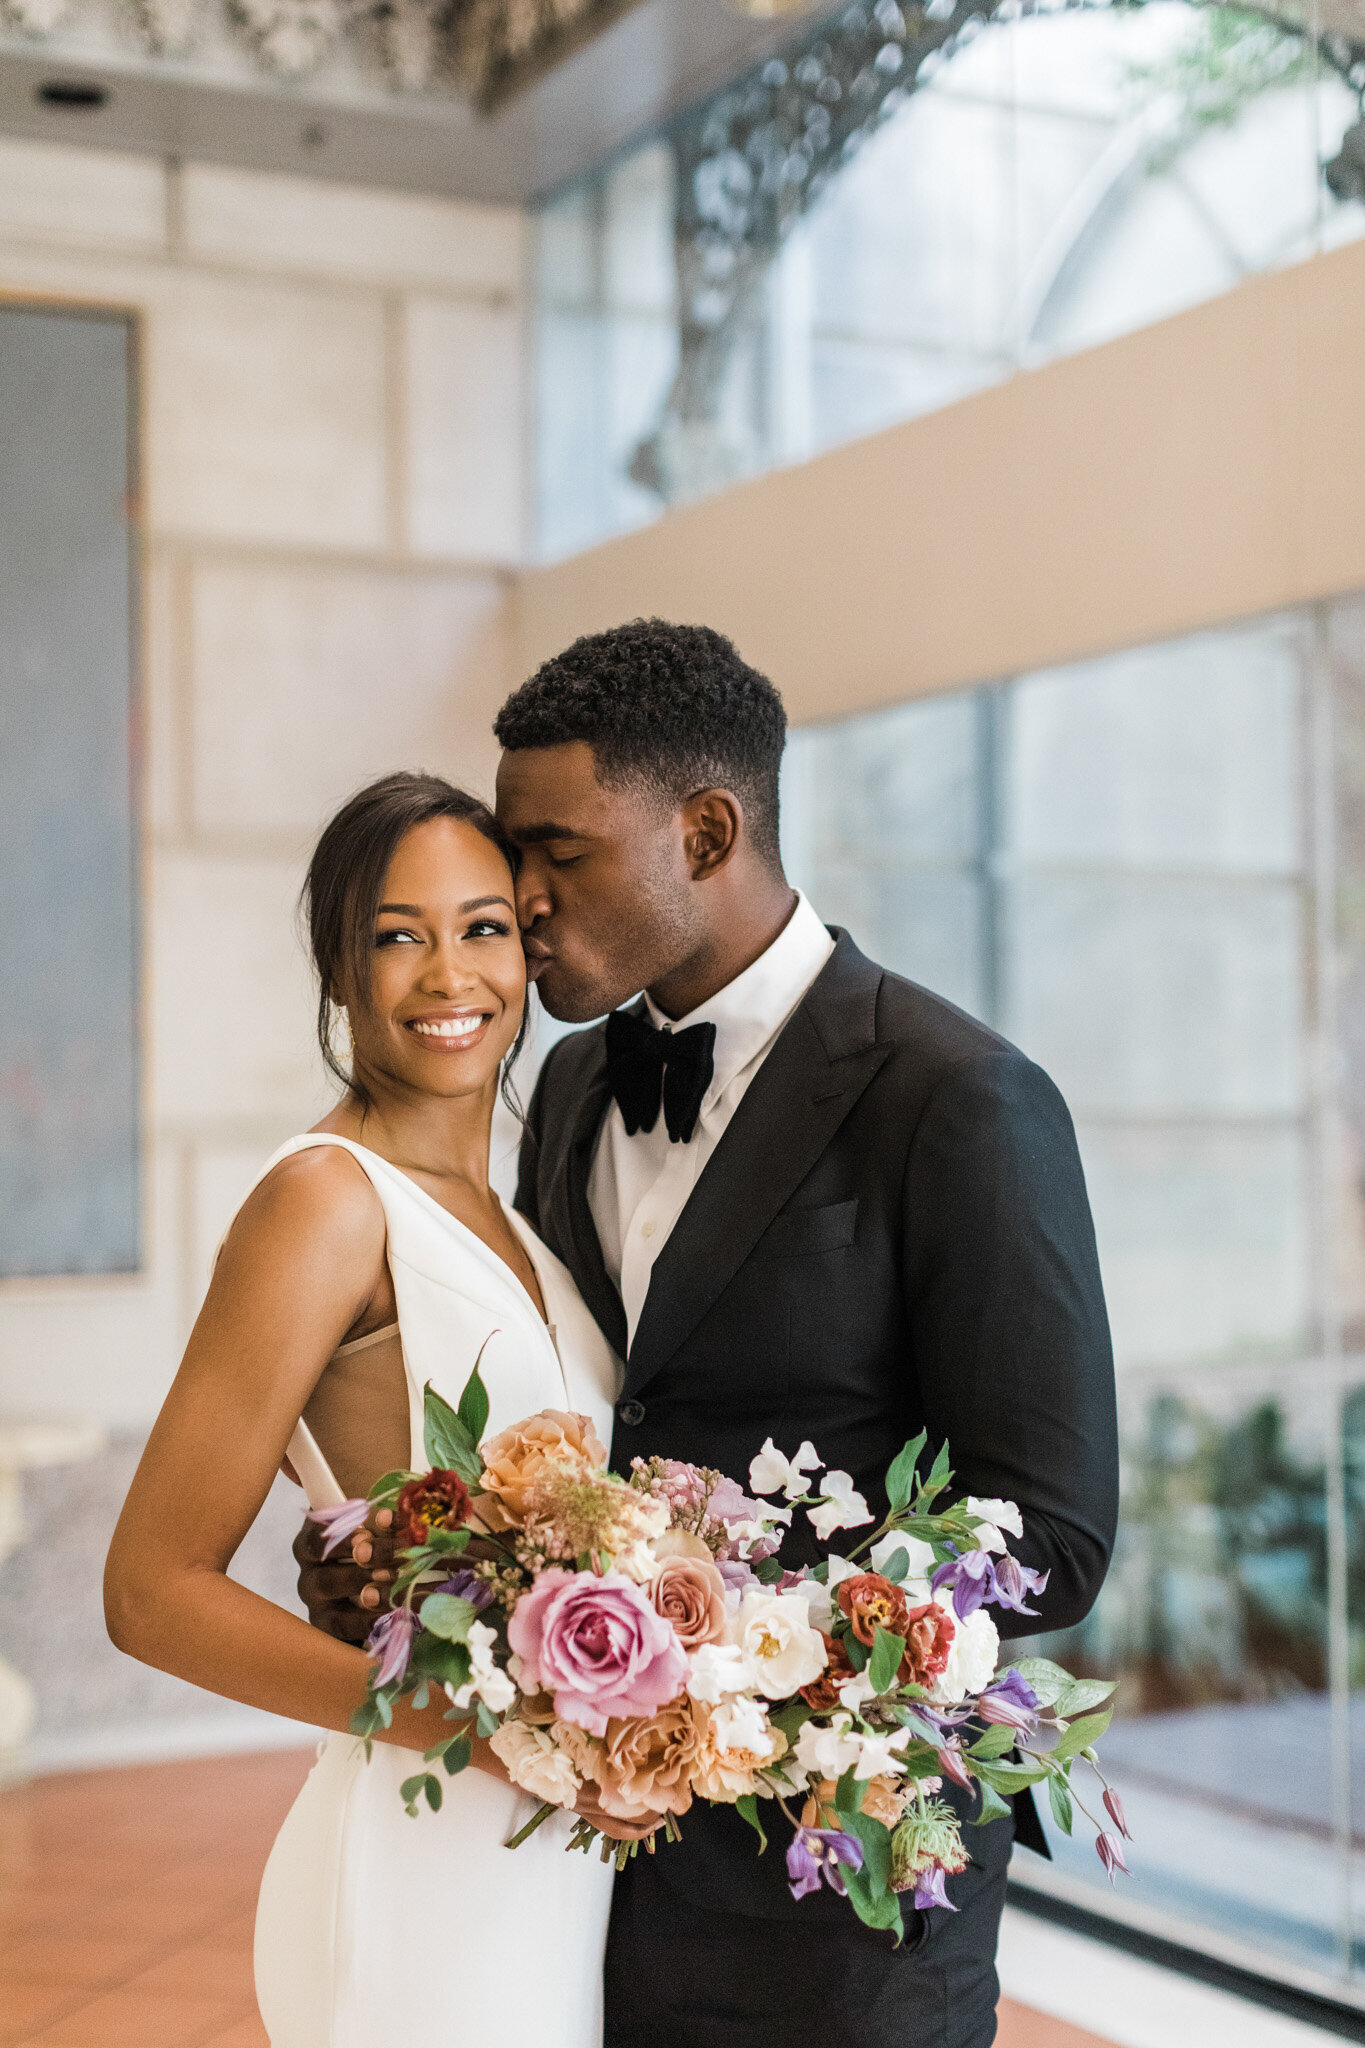 An African American bride and groom posing joyfully together at the Crescent Court hotel in Dallas, Texas. The bride is wearing a sleeveless white dress and holding a large bouquet while smiling and glancing of to the side. The groom is wearing a black tuxedo while kissing the bride on the cheek with his eyes closed.